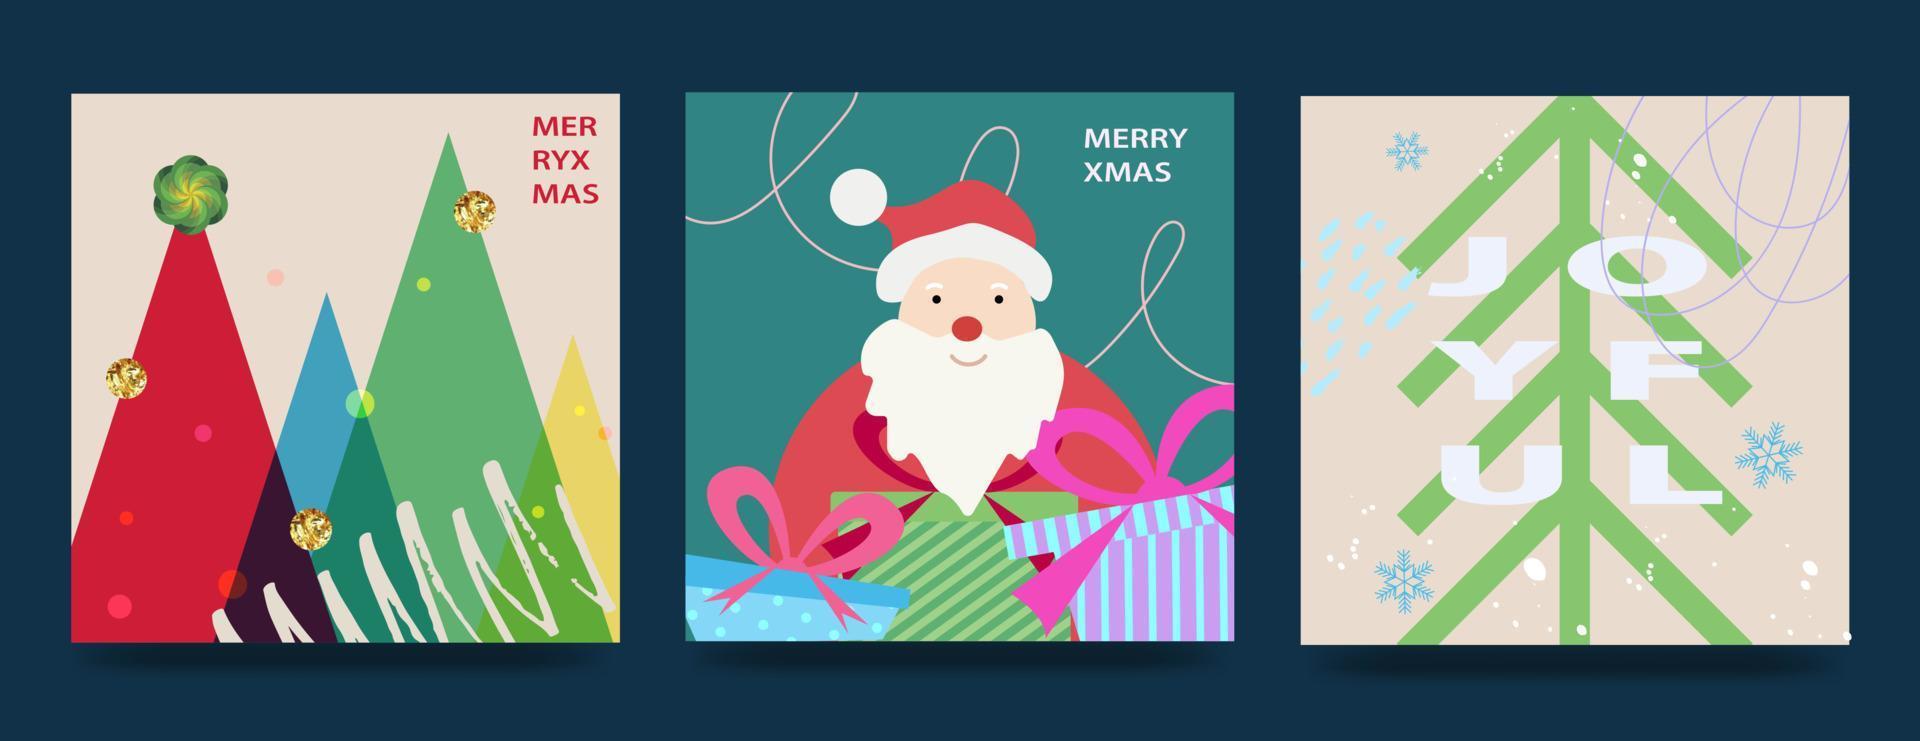 Merry Christmas and Happy New Year Set of greeting cards, posters, holiday covers. Modern Xmas design in blue, green, red colors. Christmas tree, balls, gifts. Vector